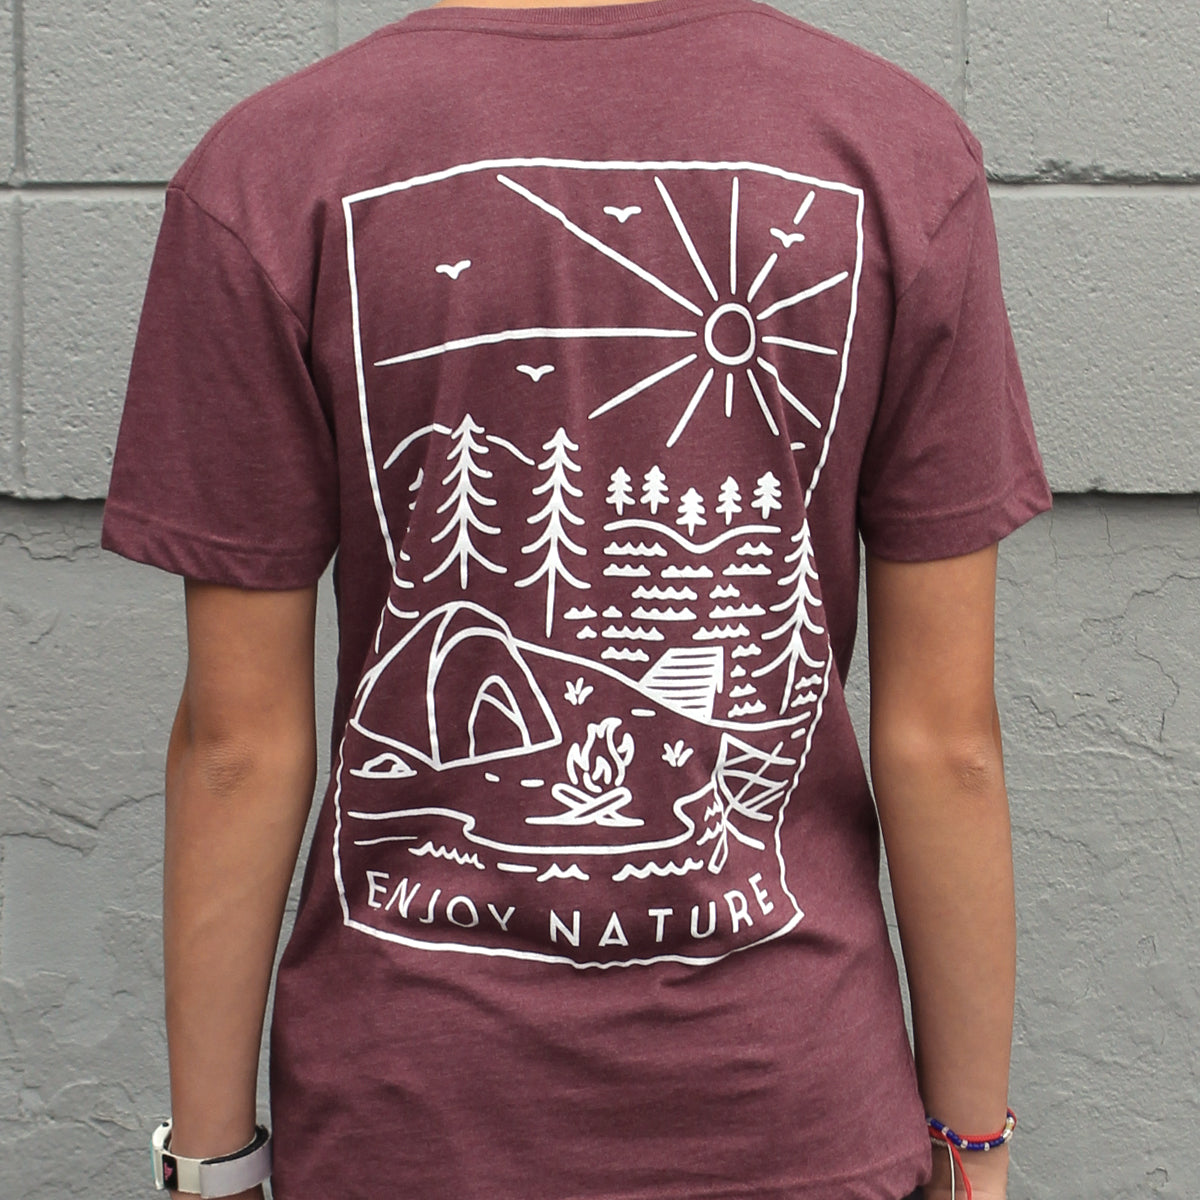 C&O Canal Enjoy Nature (Vintage Burgundy) / Shirt - Route One Apparel